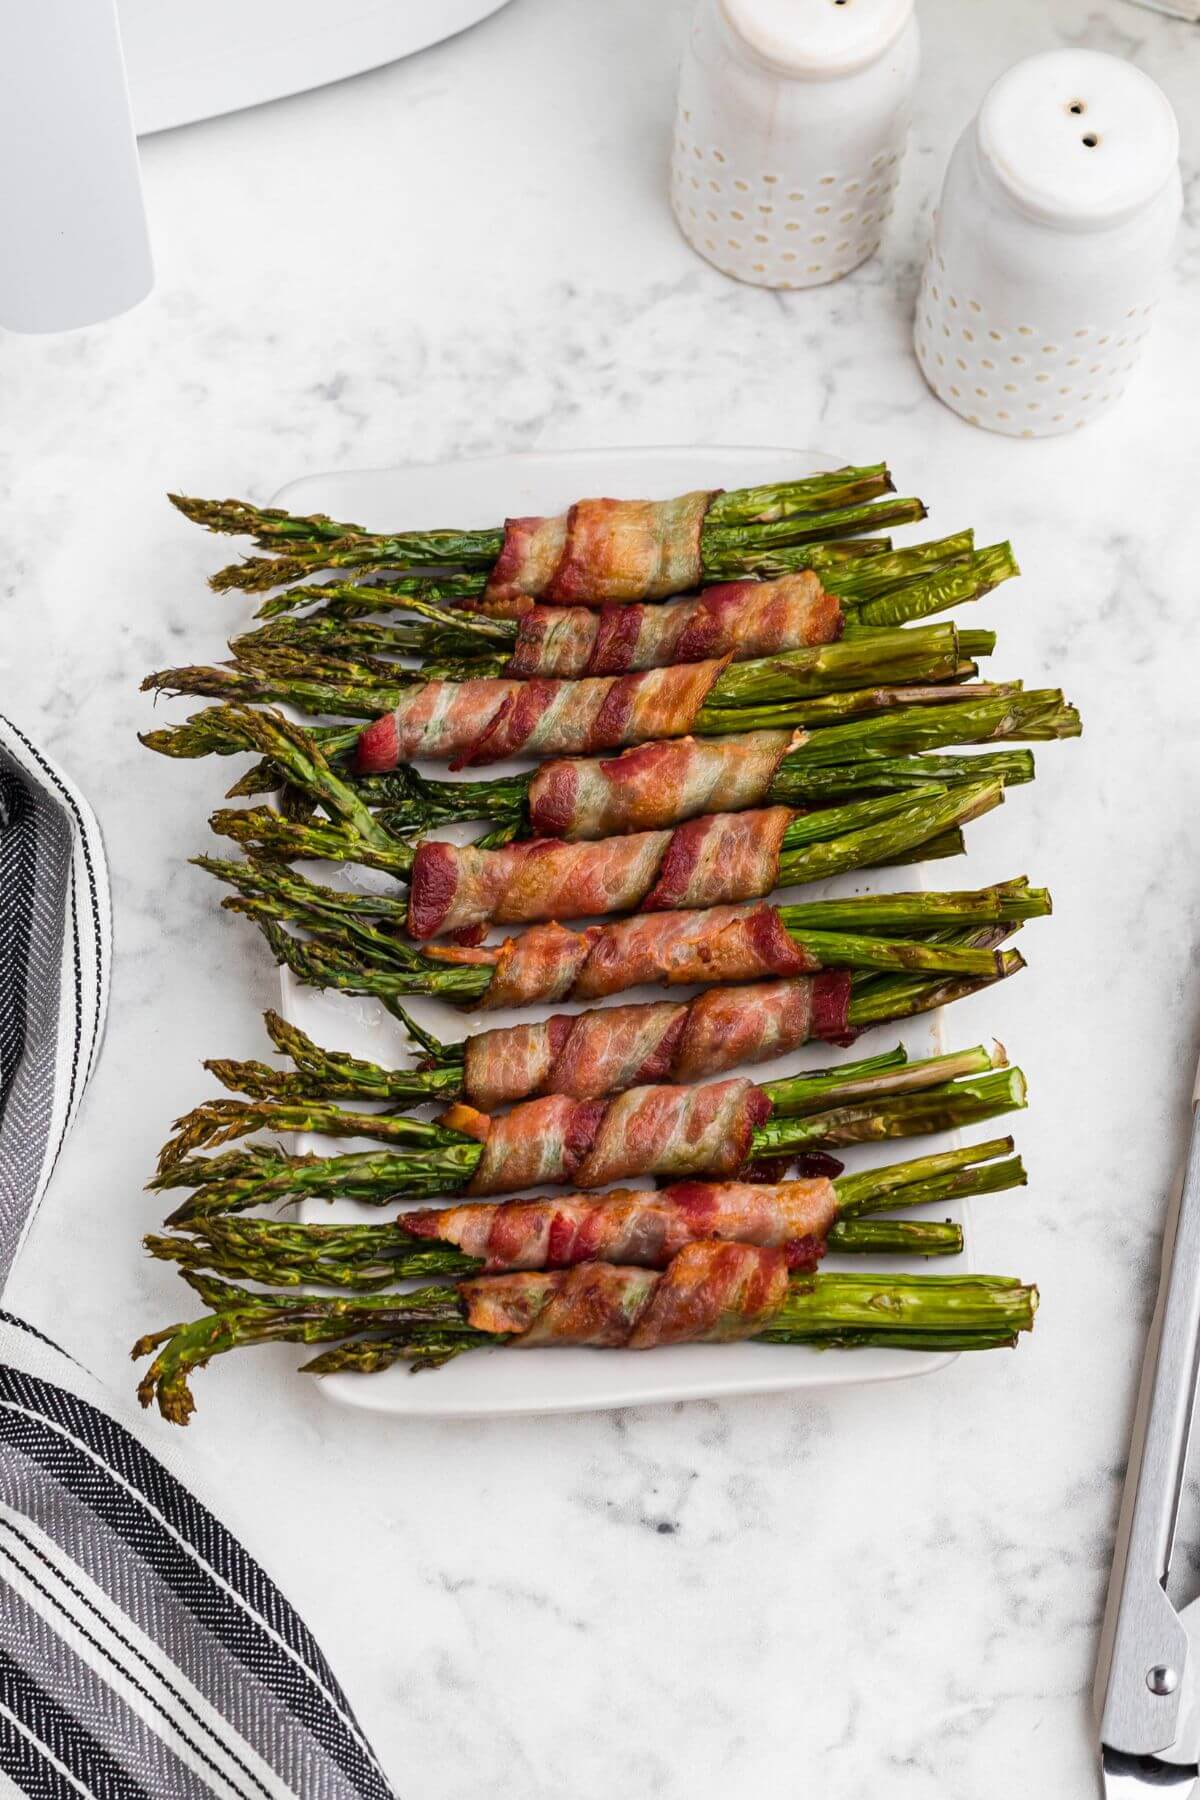 Crispy brown bacon wrapped around asparagus spears, on a white rectangle plate. 